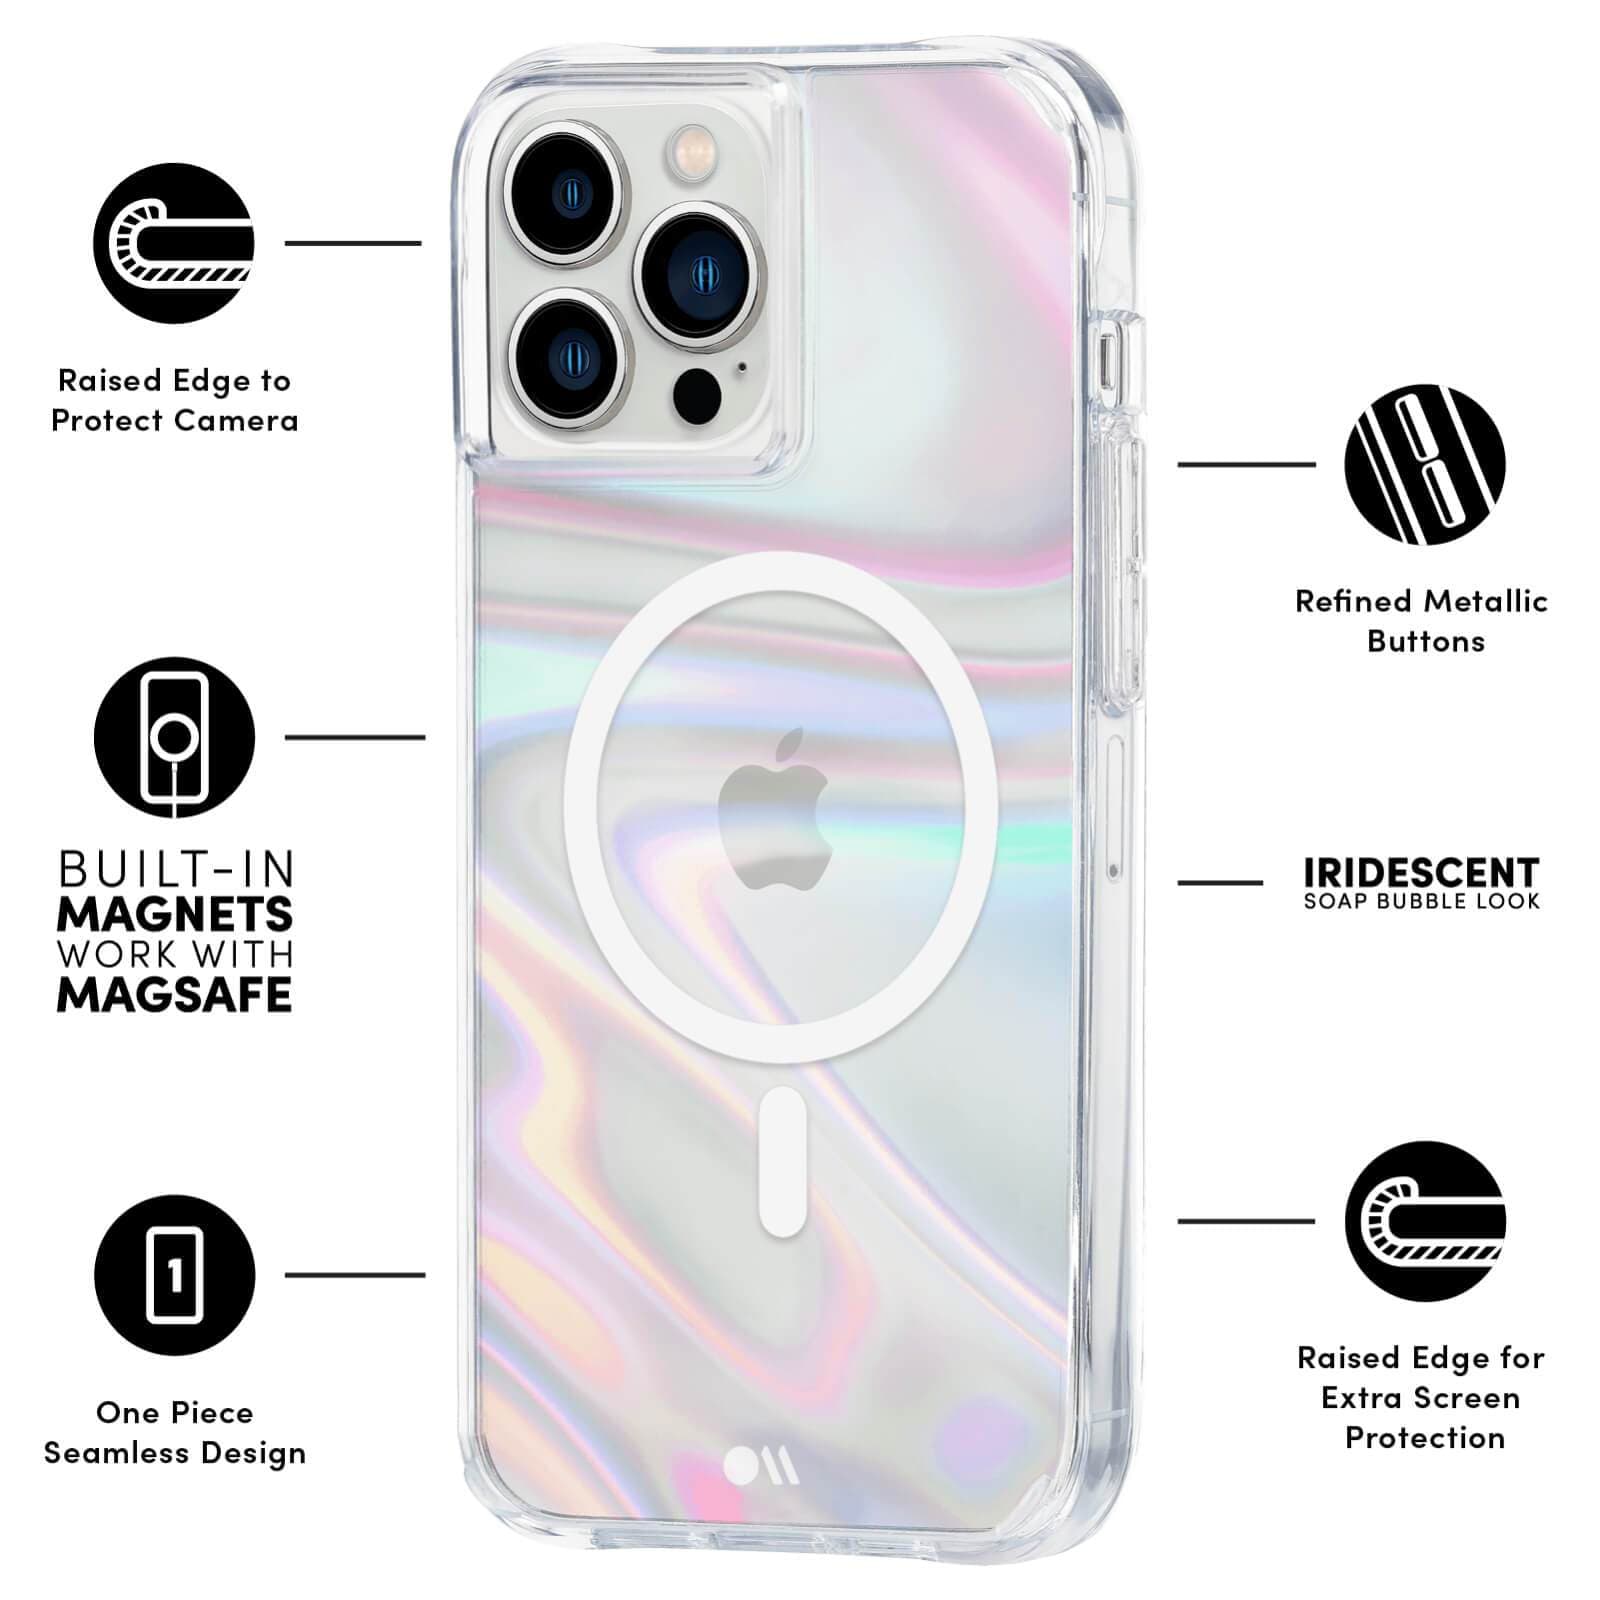 FEATURES: RAISED EDGE TO PROTECT CAMERA, BUILT-IN MAGNETS WORK WITH MASGAFE, ONE PIECE SEAMLESS DESIGN, REFINED METALLIC BUTTONS, IRIDESCENT SOAP BUBBLE LOOK, RAISED EDGE FOR EXTRA SCREEN PROTECTION. COLOR::SOAP BUBBLE